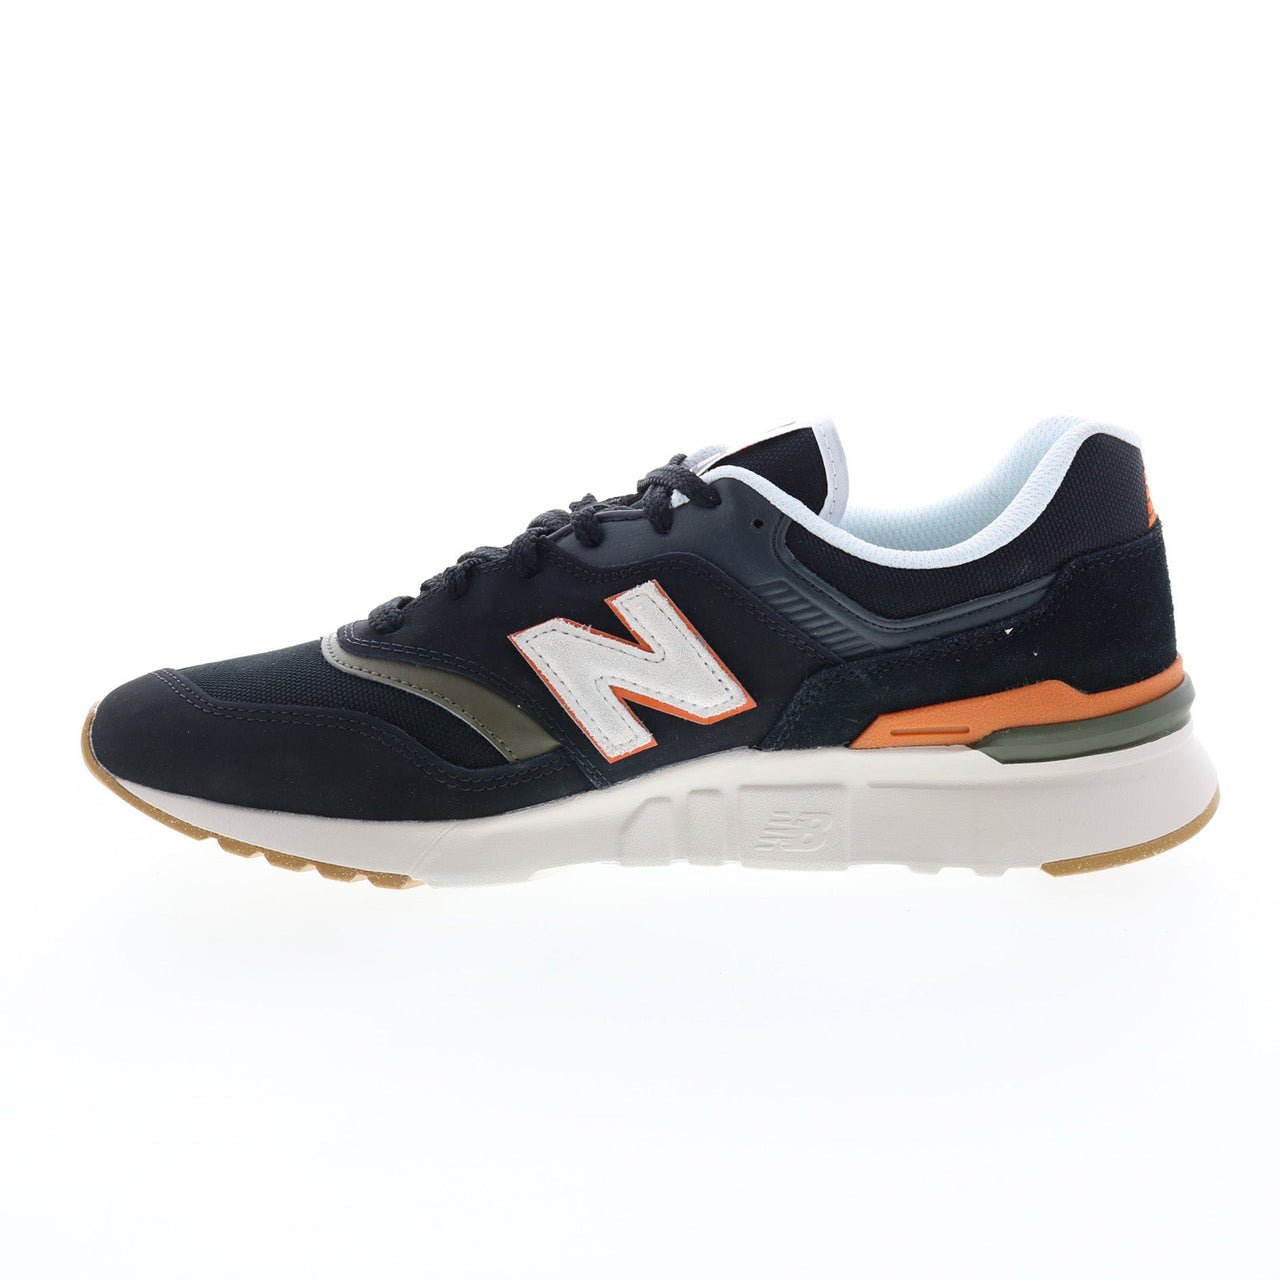 New Balance 997H CM997HLP Mens Black Leather Lace Up Lifestyle Sneaker ...